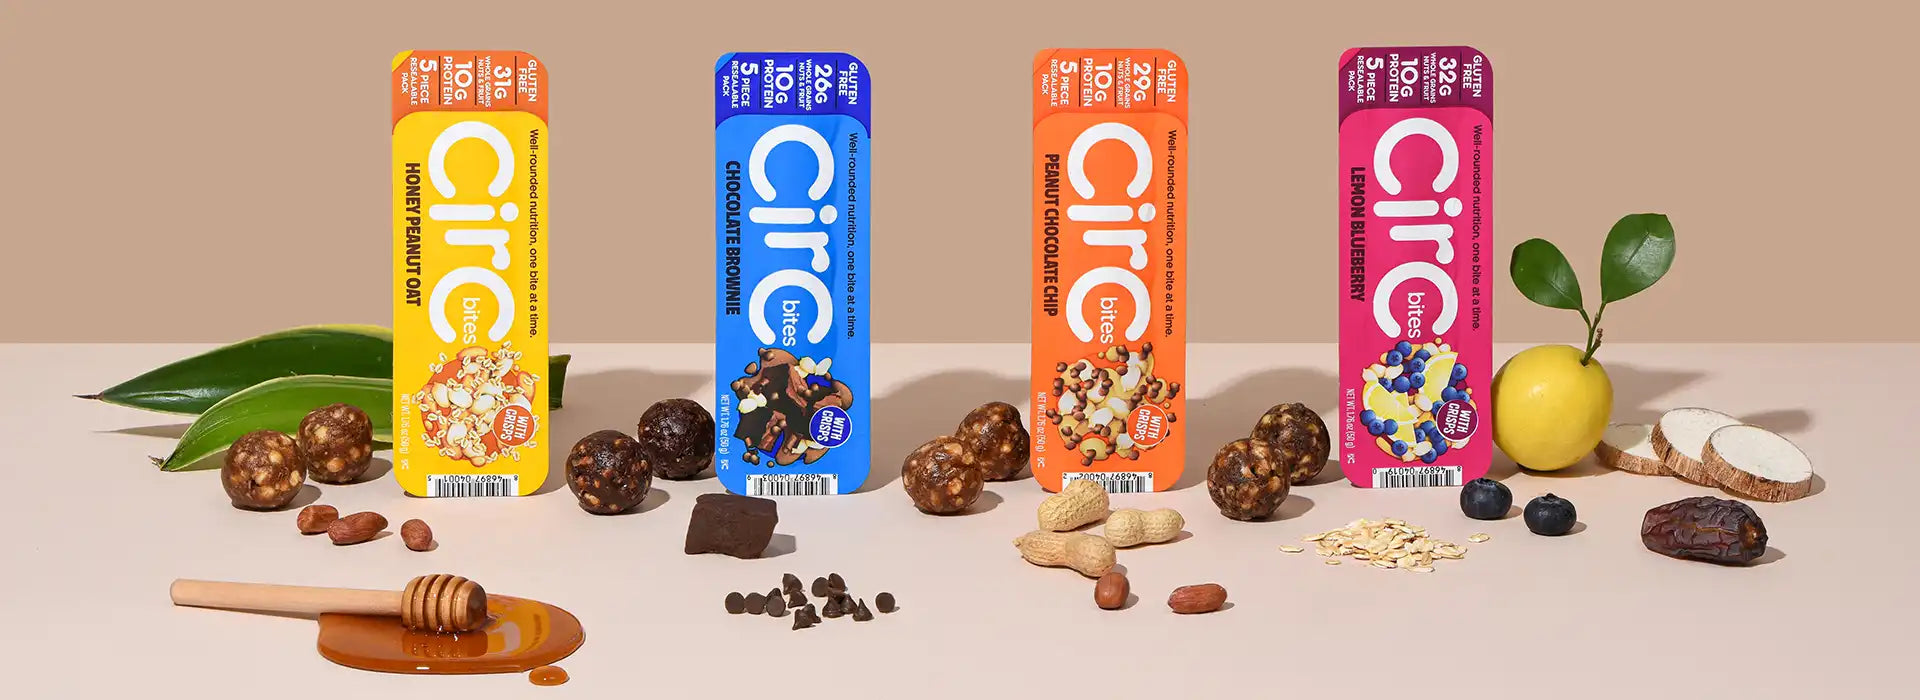 CirC energy bites with all natural ingredients, dates, peanuts, oats and agave